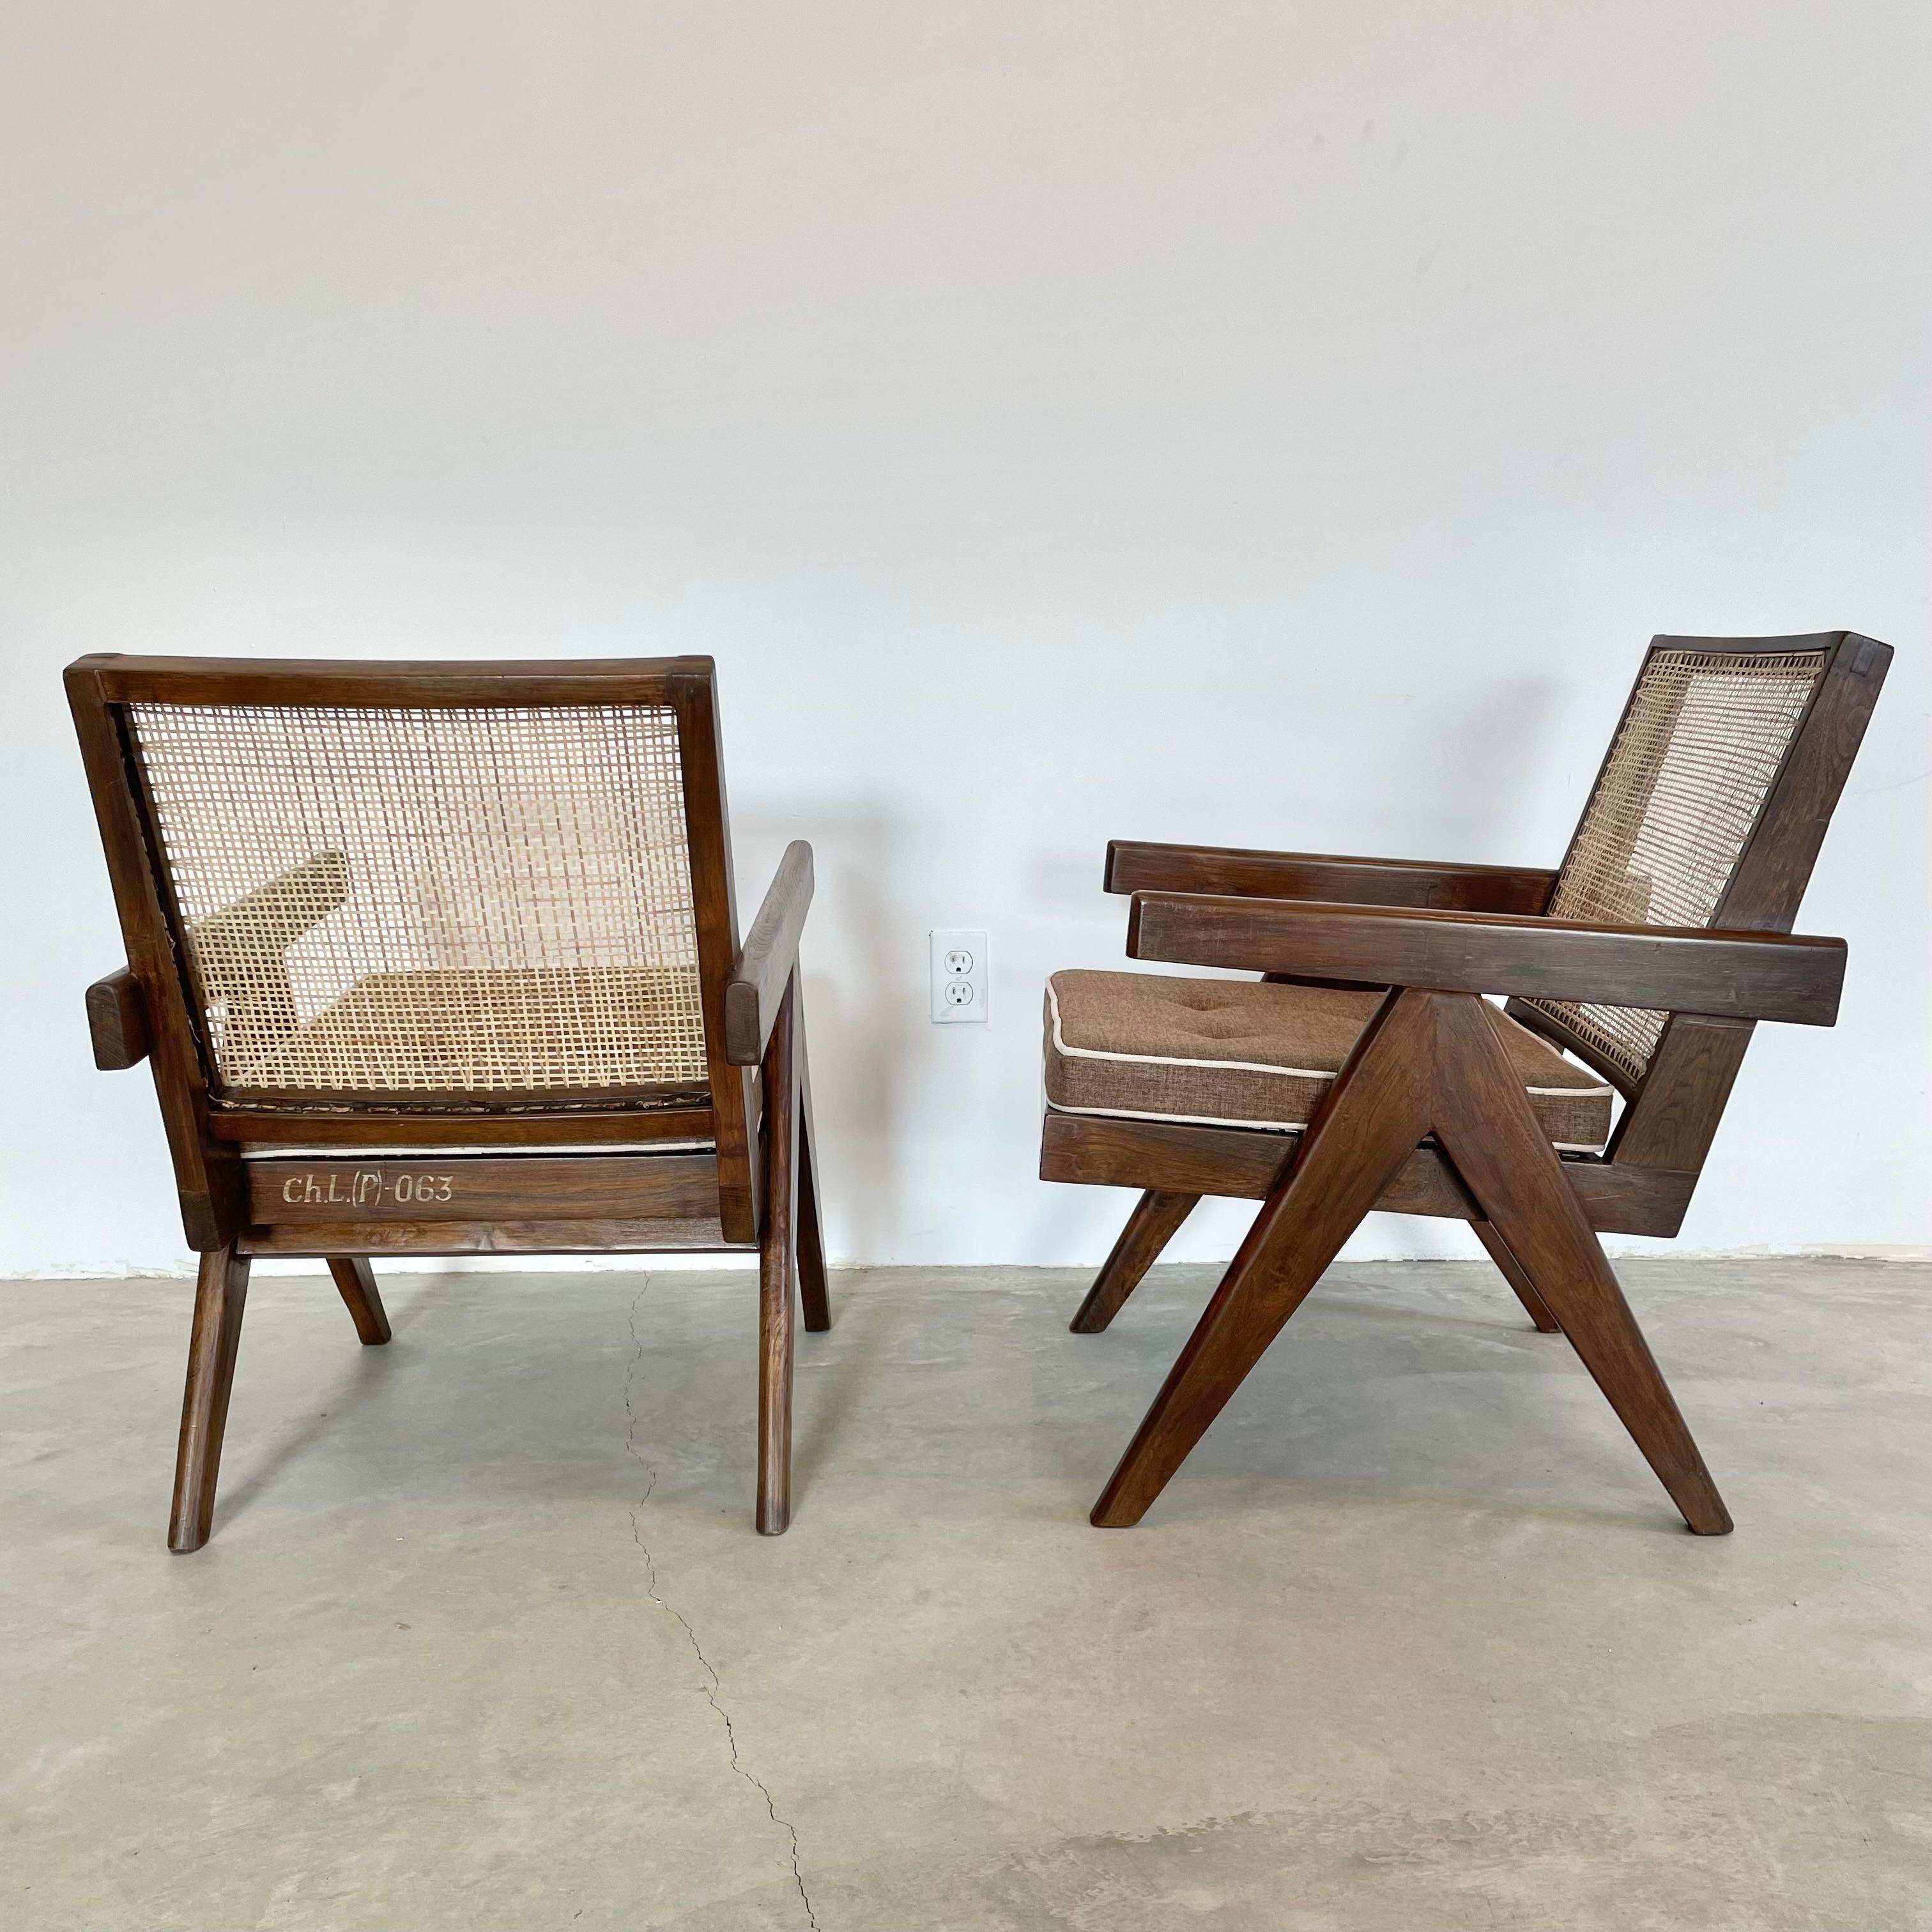 Pierre Jeanneret Easy Chairs, 1950s Chandigargh In Good Condition For Sale In Los Angeles, CA